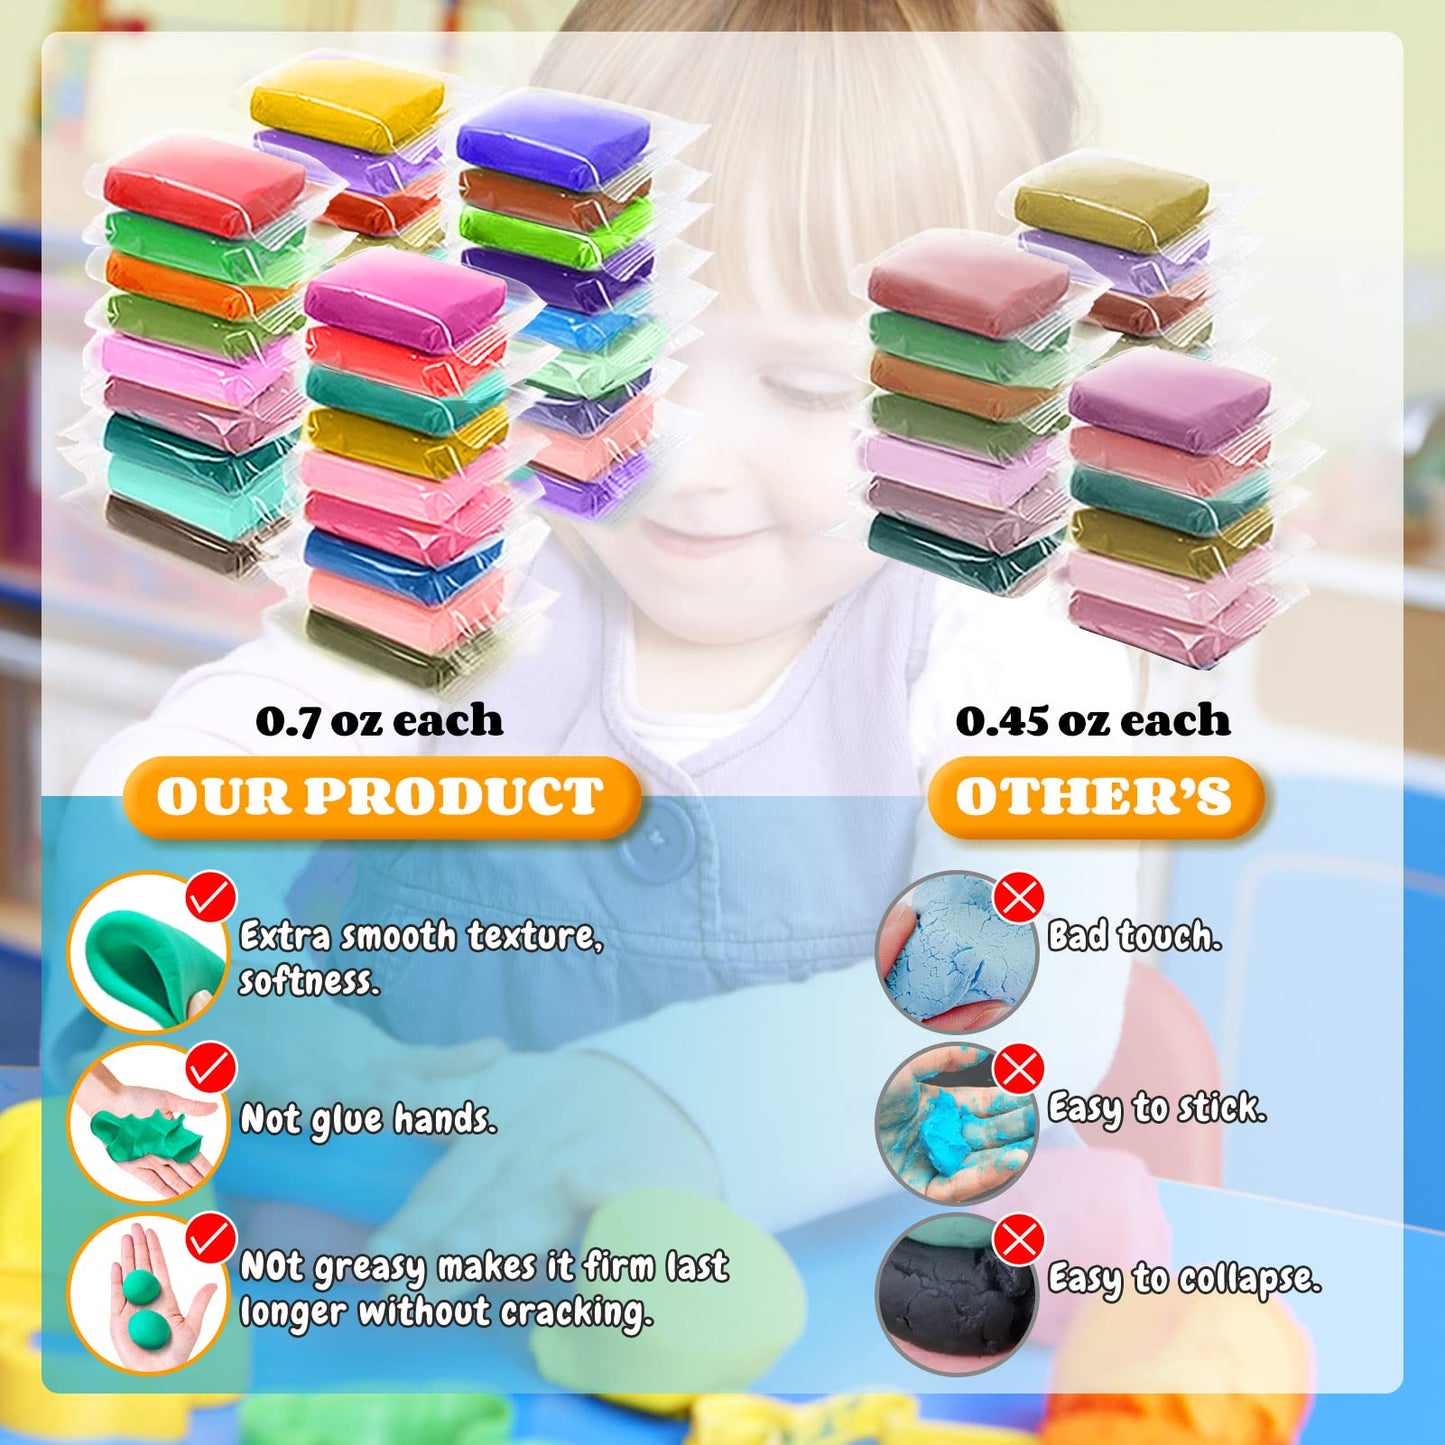 Modeling Clay Kit - 36 Colors Air Dry Magic Clay, DIY Molding Clay with Sculpting Tools, Kids Art Crafts Best Gift for Boys & Girls Age 3-12 Year Old